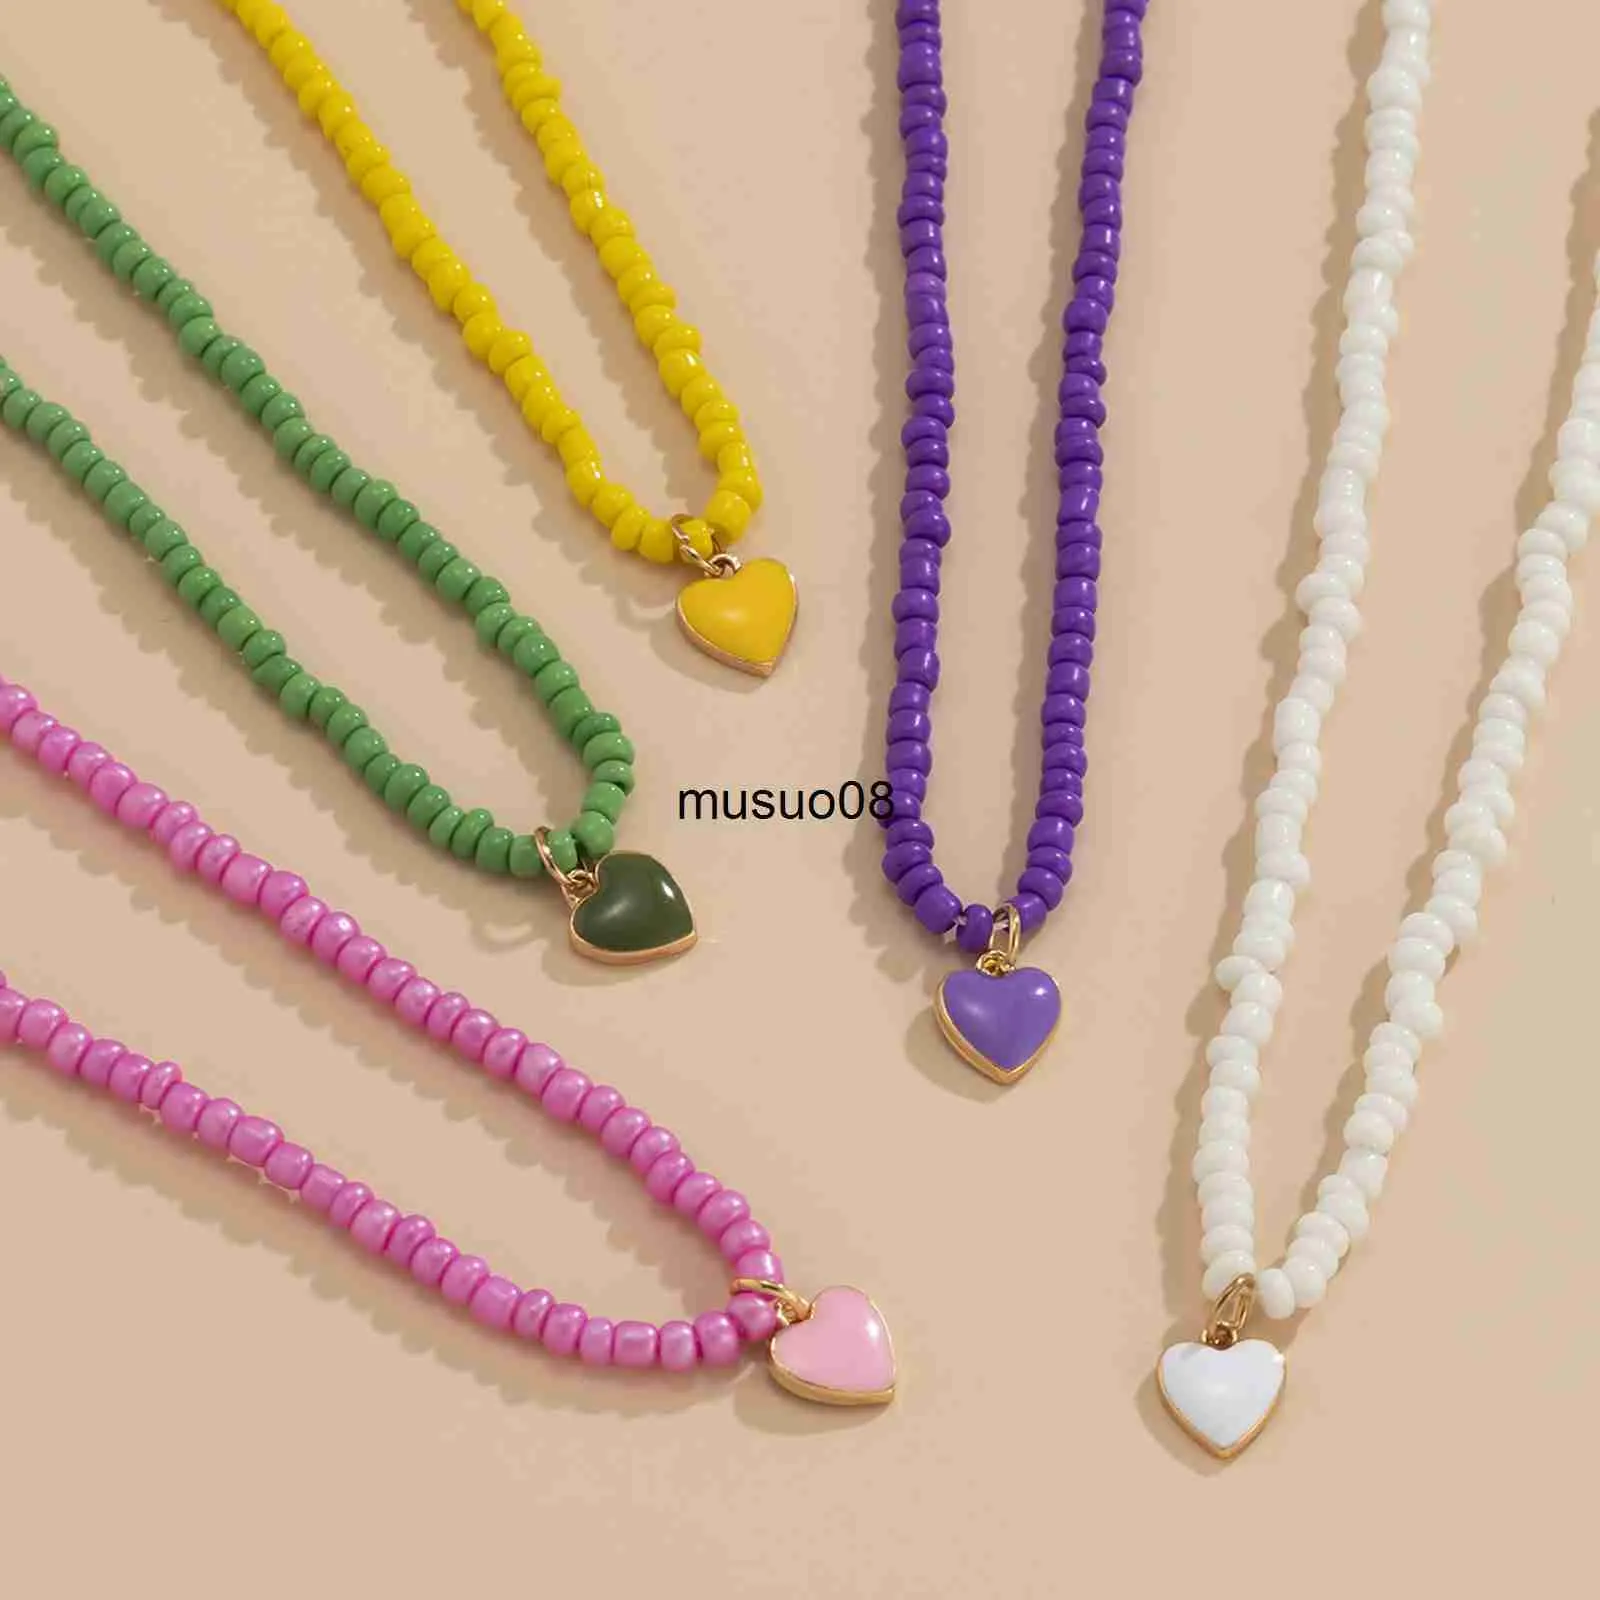 Pendant Necklaces Fashion Handmade Multicolor Seed Beads Necklace For Women Sweet Heart Pendants Necklace Summer Girls Choker Collar Jewerly 1PC J230601